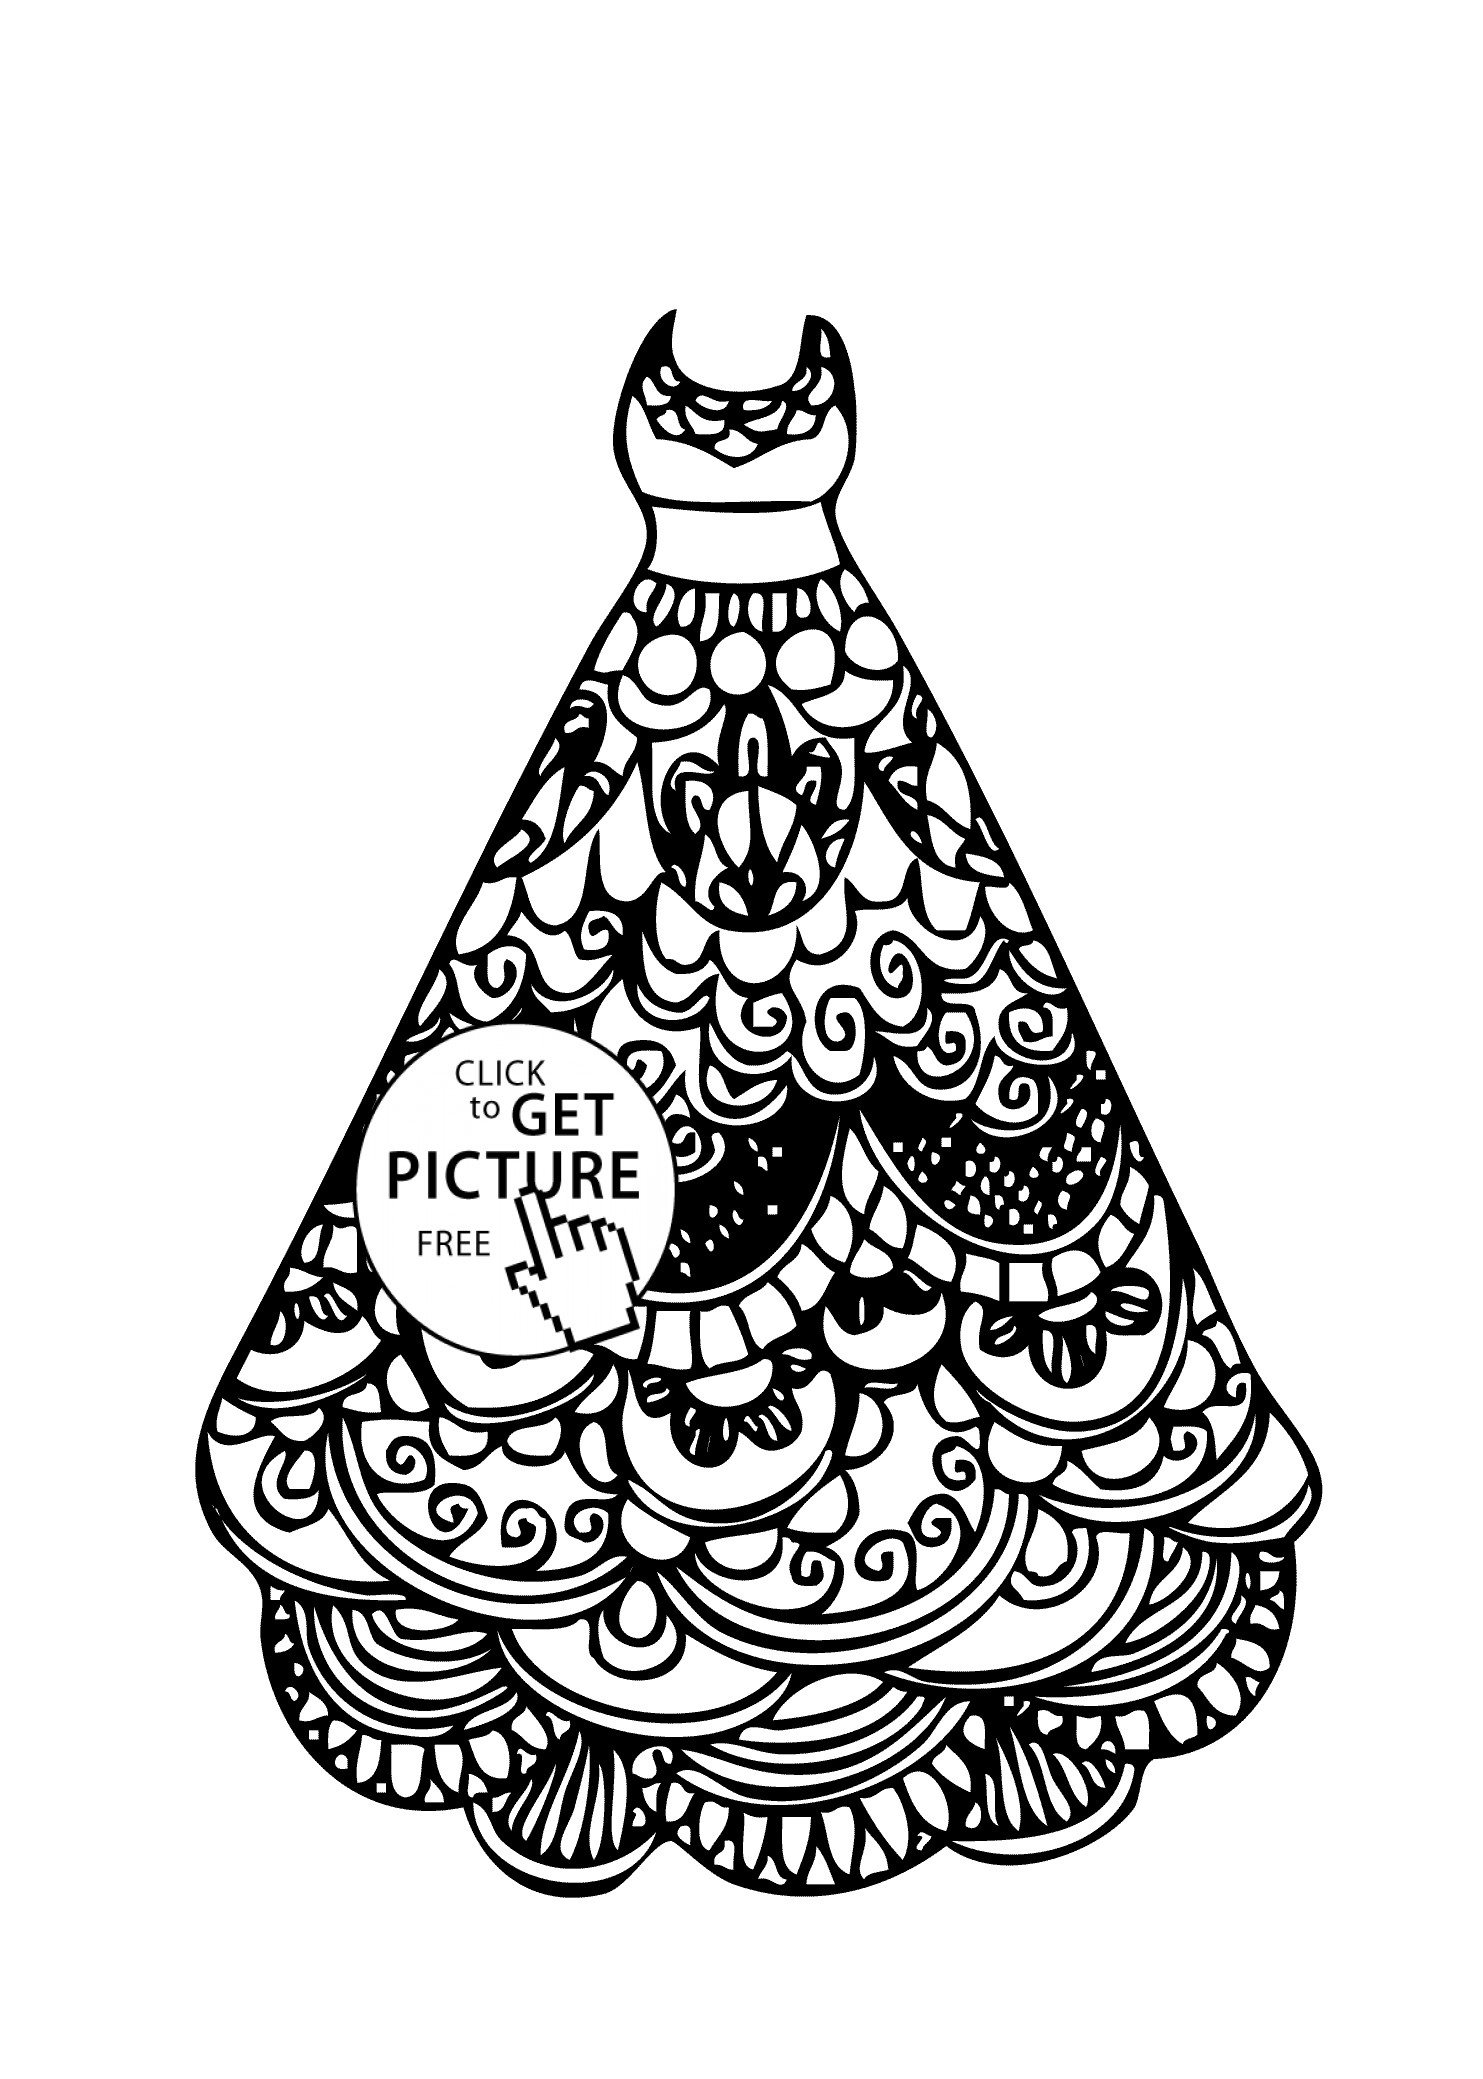 Coloring Pages For Girls Dresses
 Dress lace coloring page for girls printable free